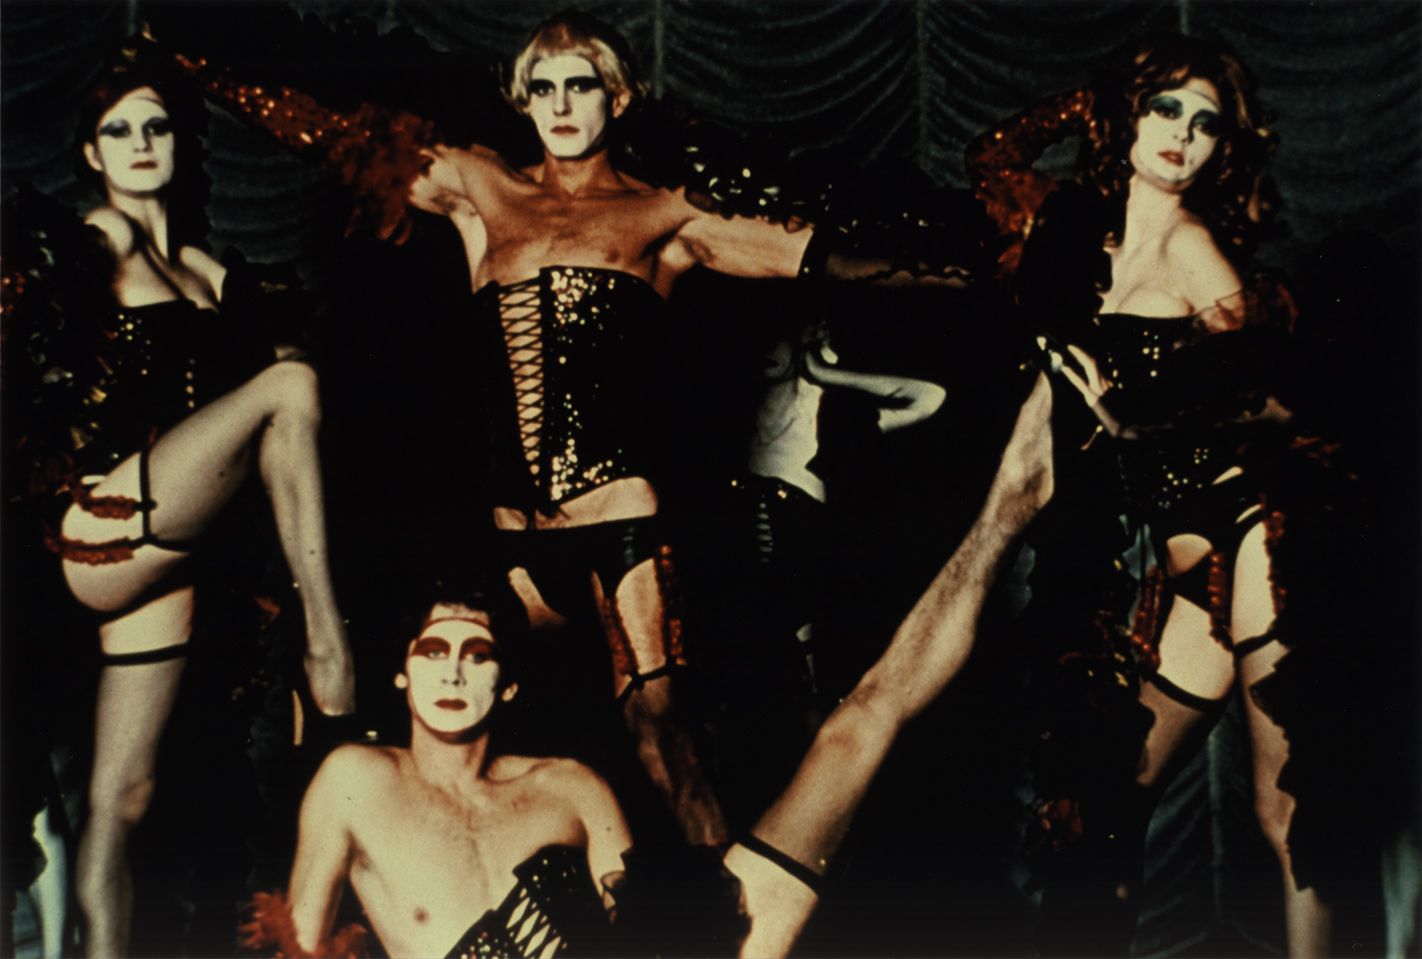 Wallpaper Photo Image: rocky horror picture show